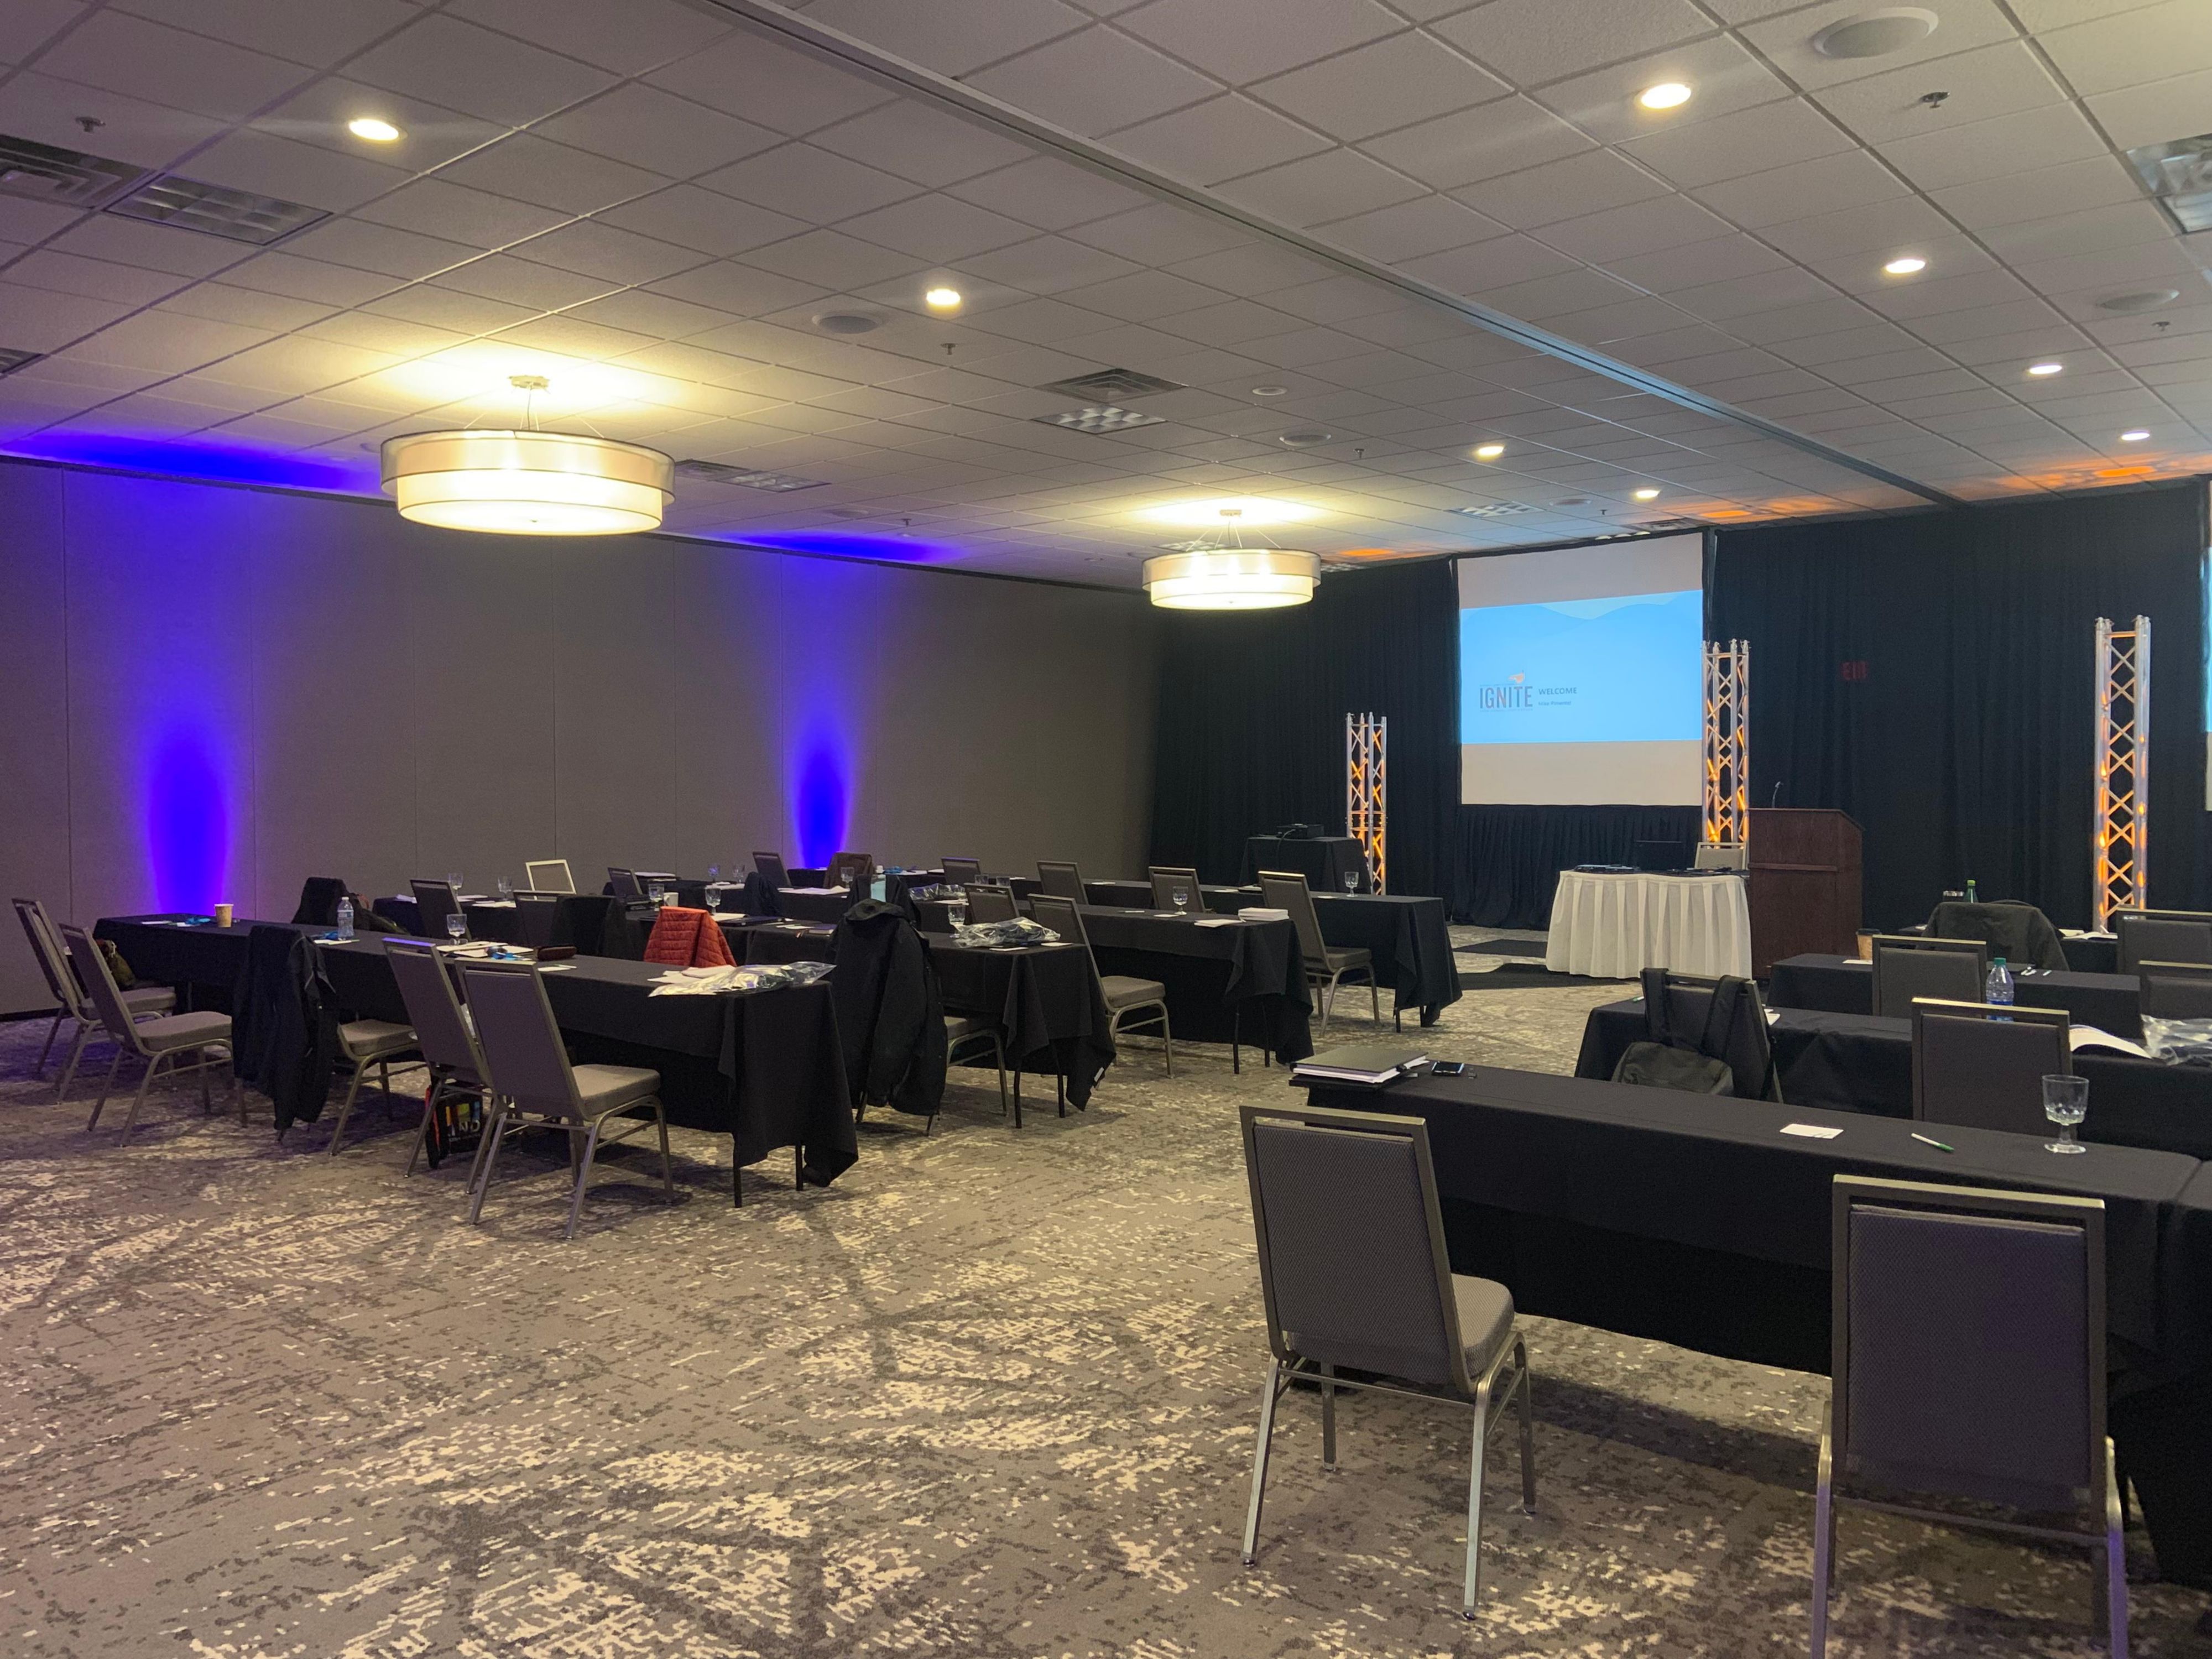 Conference center venue has been completely renovated with additional meeting space added.  It is now over 14,000 sq. ft. and is perfect for wedding receptions, trade shows, corporate meeting space, social events, and much more.